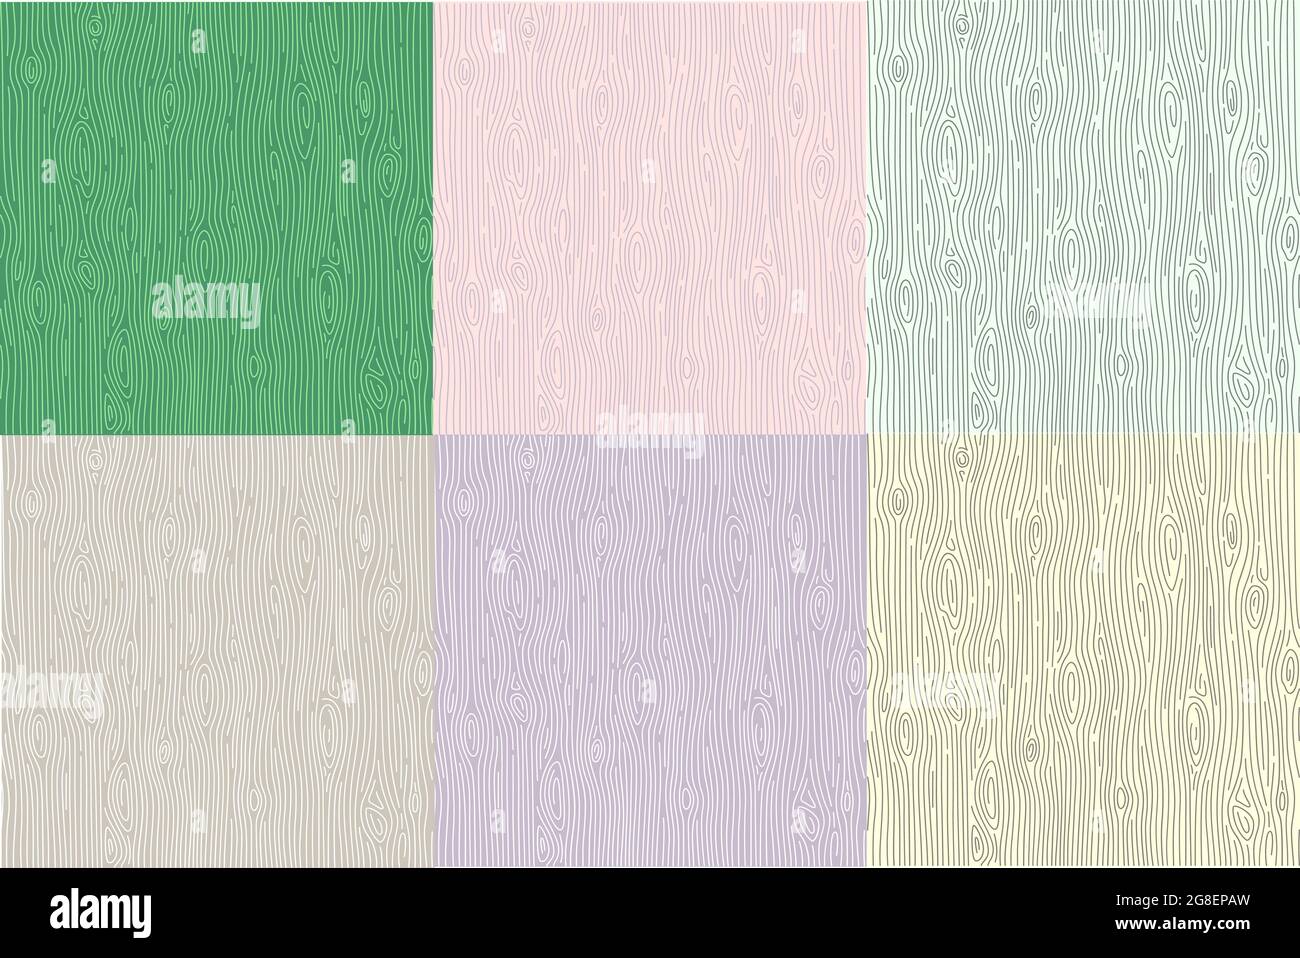 Wood texture set of 6 in different colors like green, pink, blue, violet, grey.Office and home floor texture elements for web, decor, app, background Stock Vector